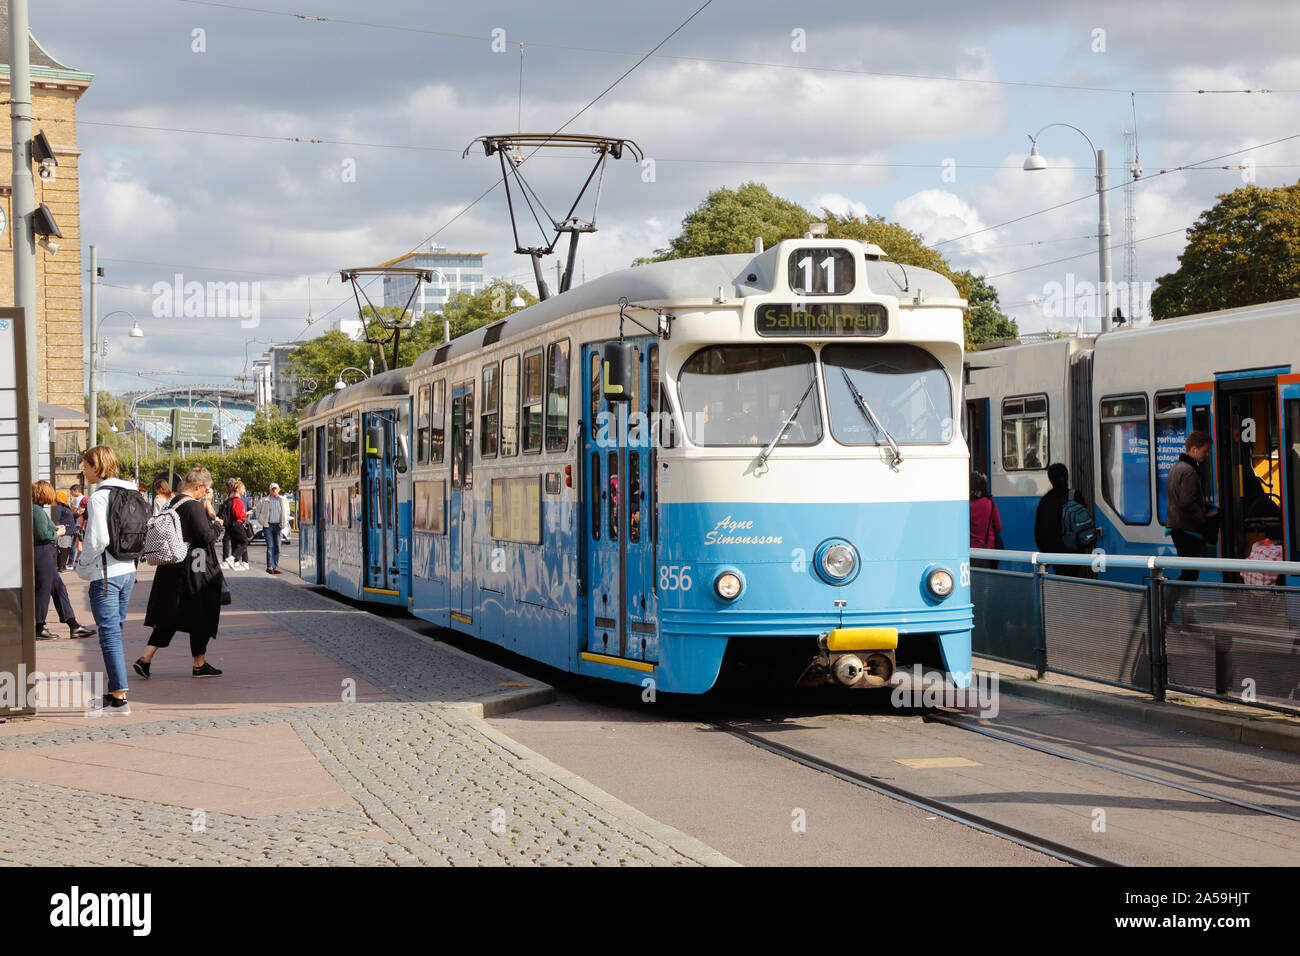 Gothenburg, Sweden - September 2, 2019: Tram of class M29 in service on line 11 in the city center. Stock Photo